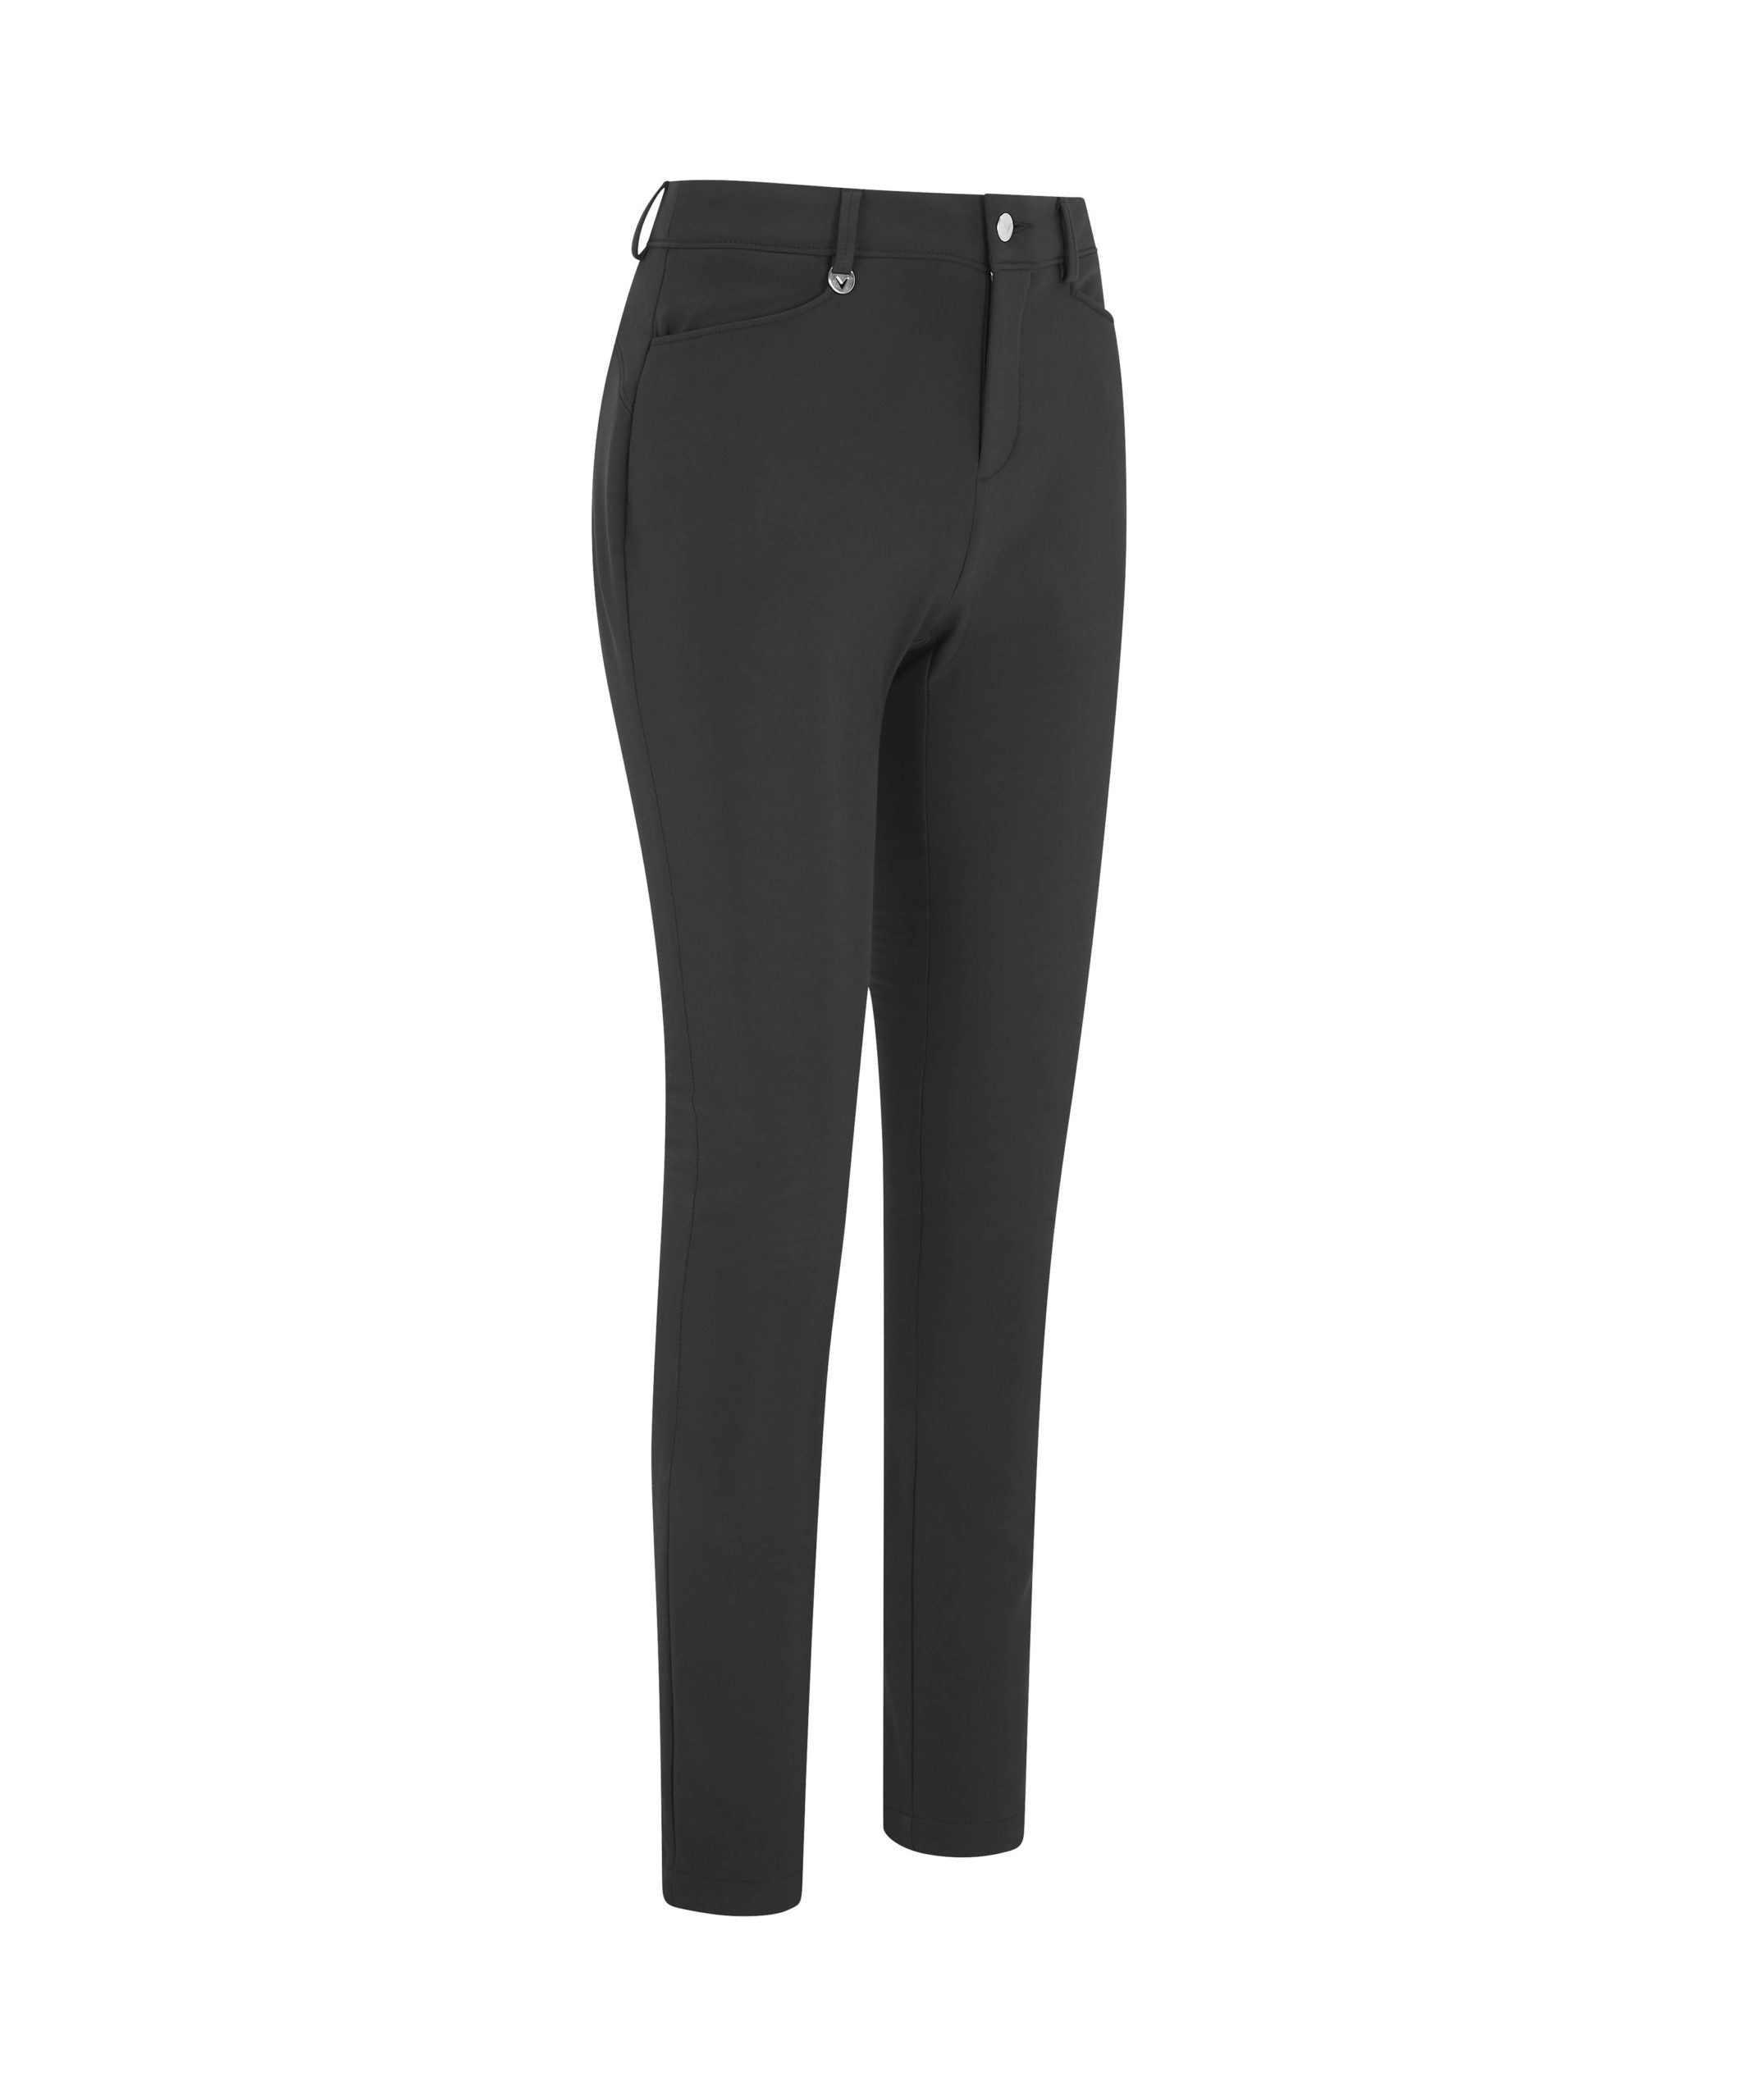 View Thermal Trousers In Caviar Caviar 2 27 information